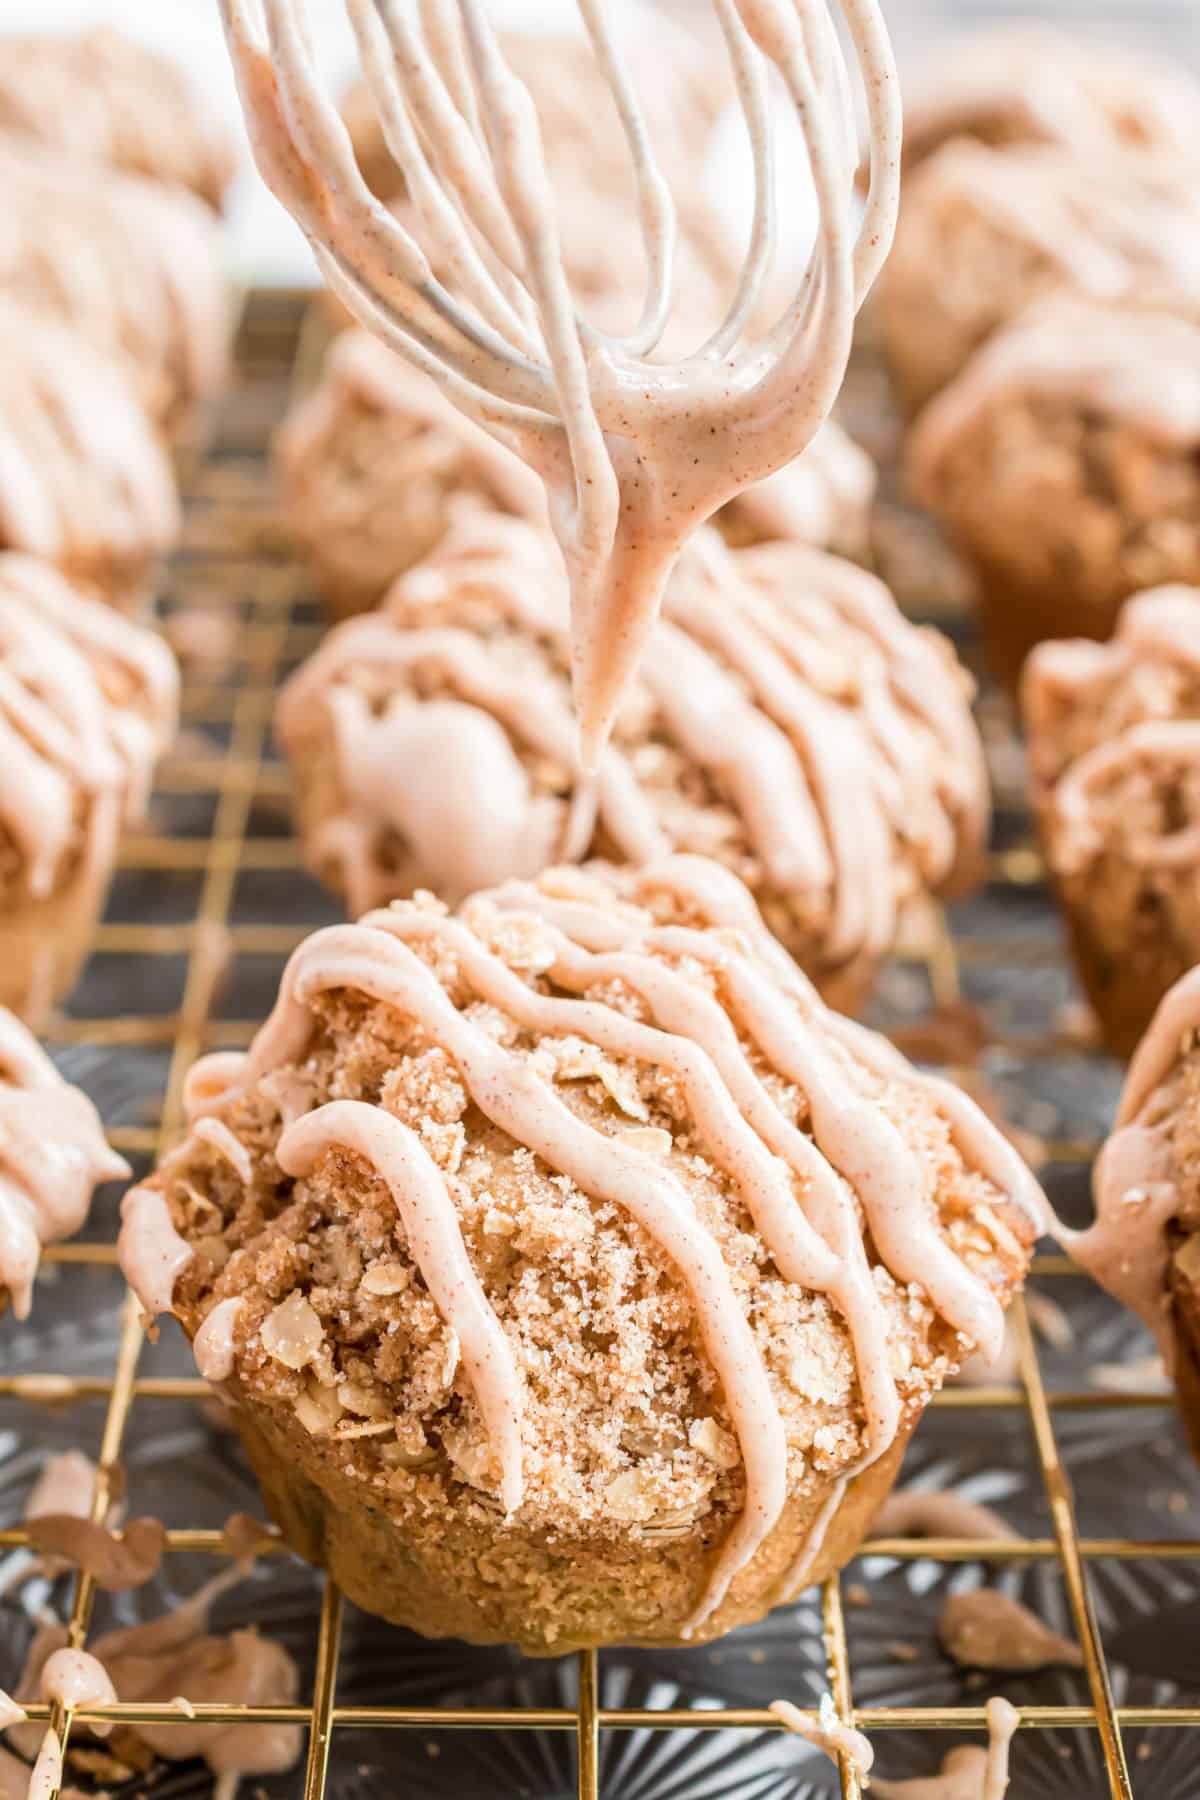 Cinnamon icing being drizzled on muffins with a whisk.